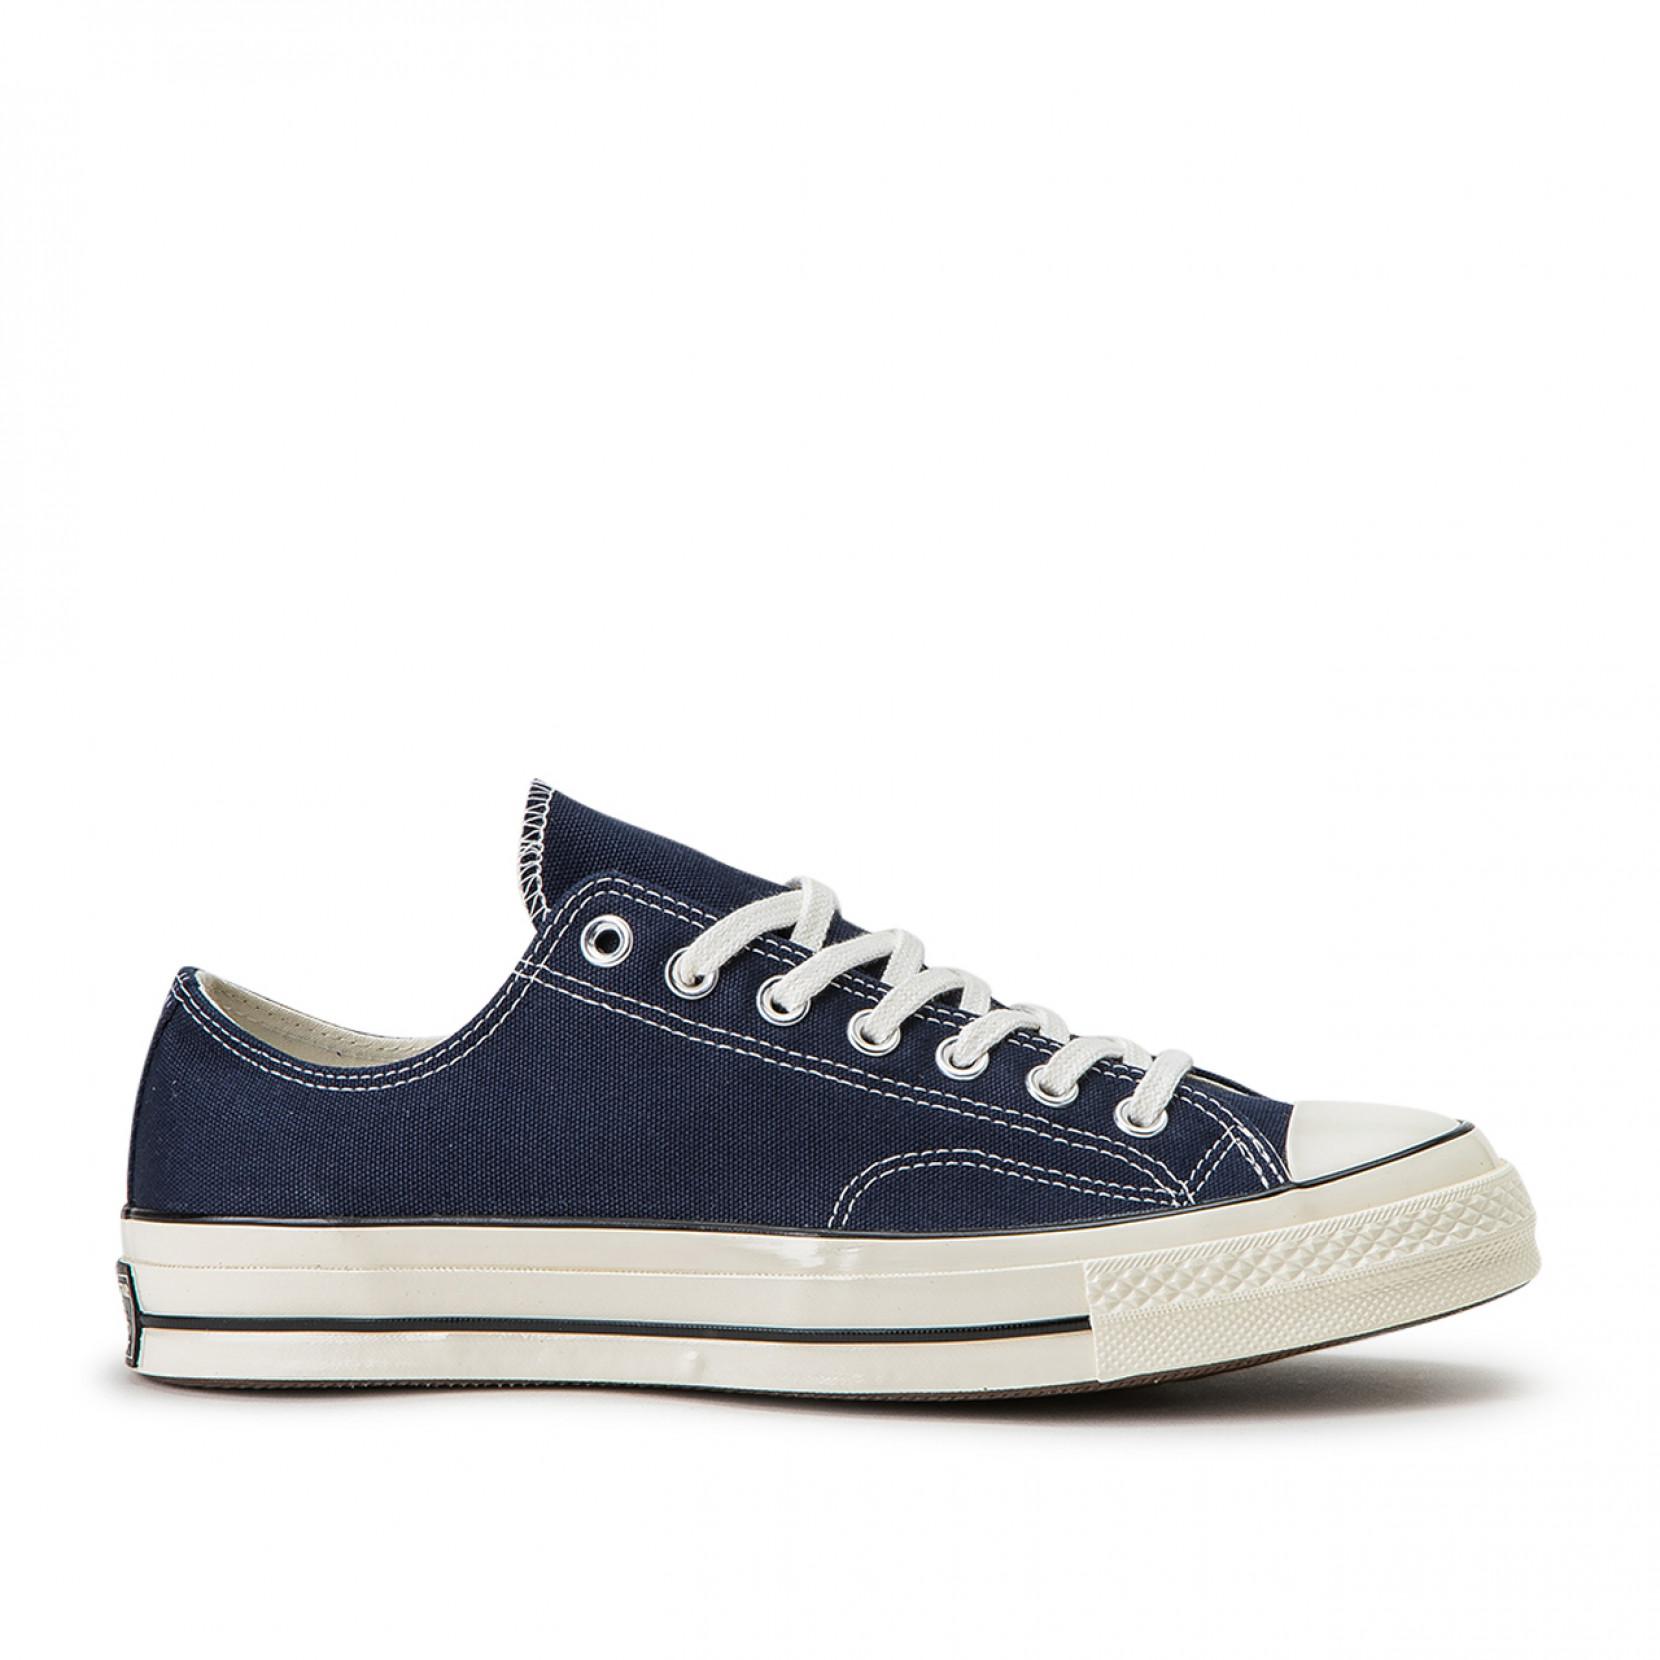 Converse 70's Chuck Low 159625c (canvas) in Navy (Blue) for Men - Lyst